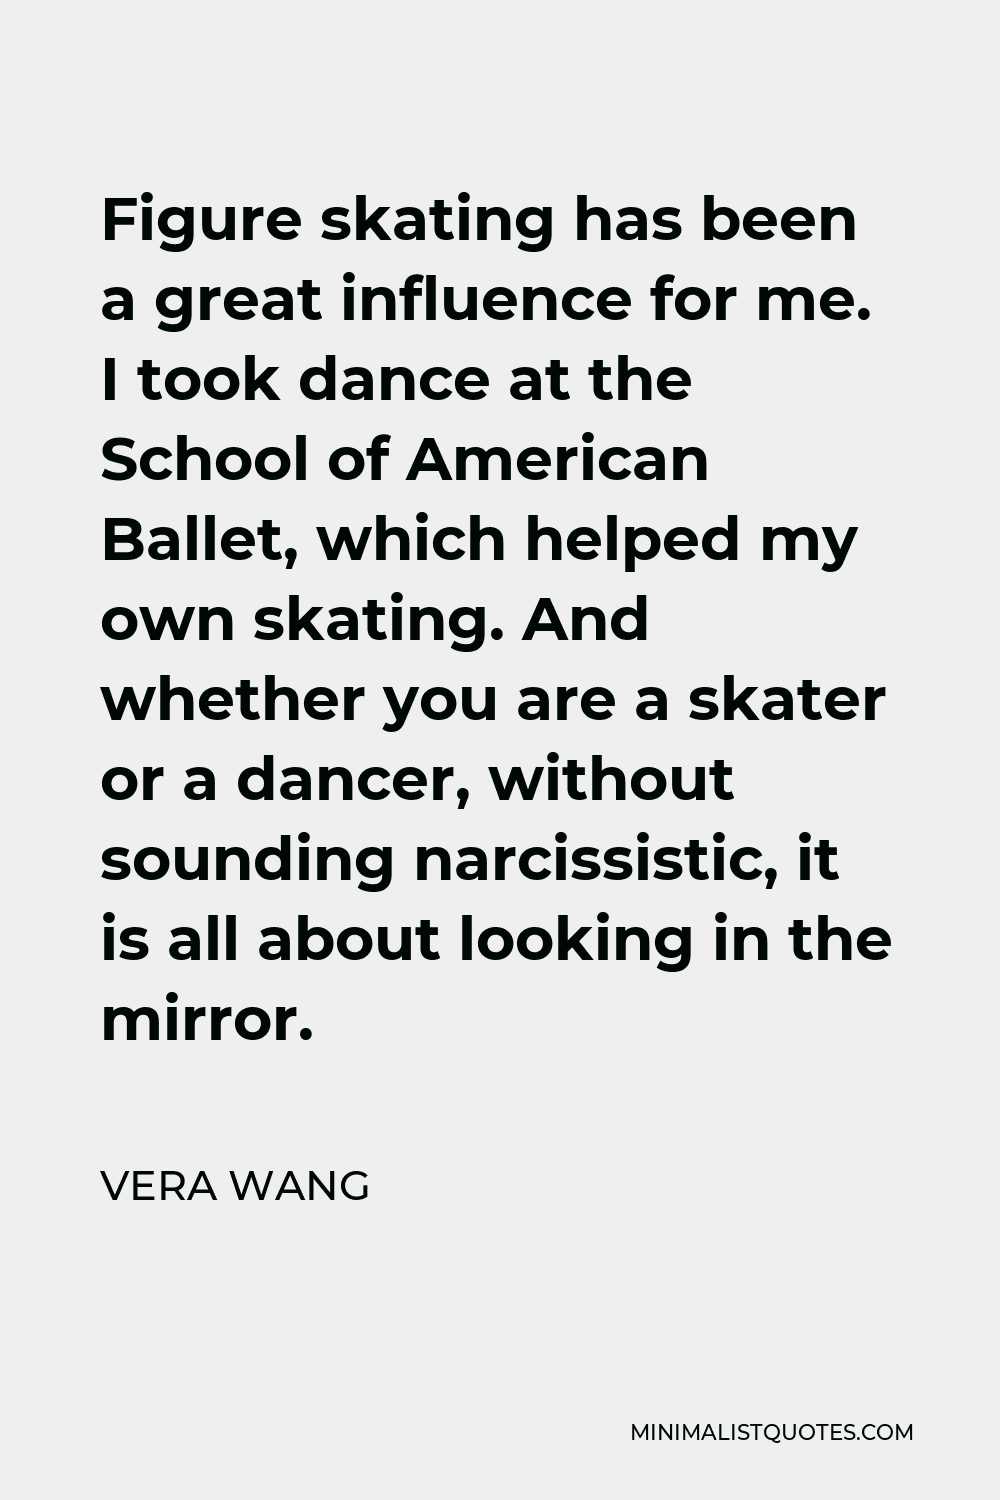 Vera Wang Quote - Figure skating has been a great influence for me. I took dance at the School of American Ballet, which helped my own skating. And whether you are a skater or a dancer, without sounding narcissistic, it is all about looking in the mirror.